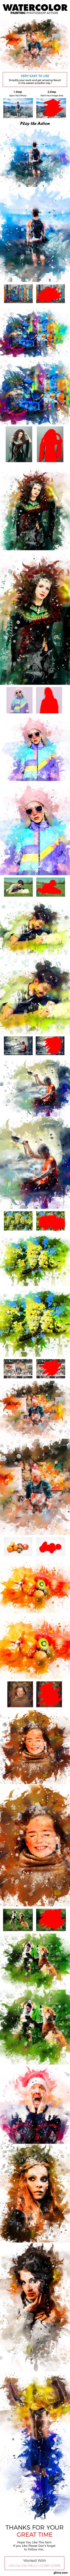 GraphicRiver - Watercolor Painting Photoshop Action 21875063